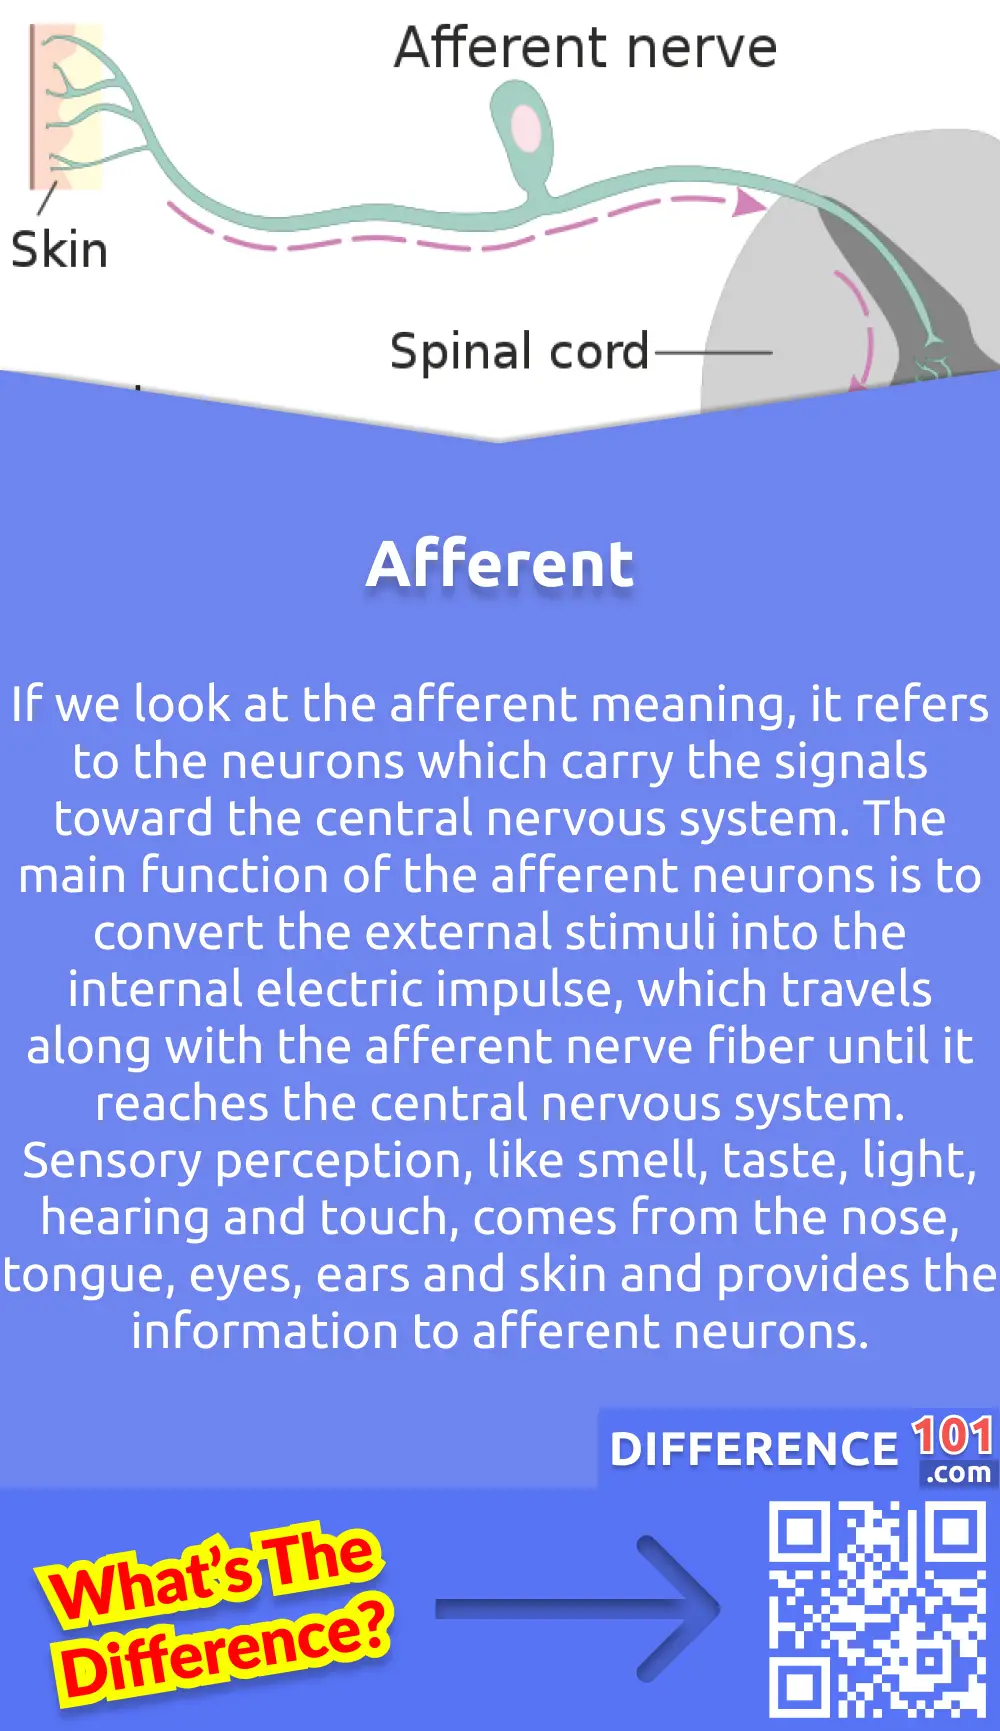 What Is Afferent? If we look at the afferent meaning, it refers to the neurons which carry the signals toward the central nervous system. The main function of the afferent neurons is to convert the external stimuli into the internal electric impulse, which travels along with the afferent nerve fiber until it reaches the central nervous system. Sensory perception, like smell, taste, light, hearing and touch, comes from the nose, tongue, eyes, ears and skin and provides the information to afferent neurons. For example, in the case of light, the sensory signals are gathered from the cone cells and rod of the eye's retina, and then these nerve impulses are carried by the efferent neurons of the eyes to the brain. On the other hand, the afferent neurons of the nose are stimulated by smell, and they carry the nerve impulse to the brain.  